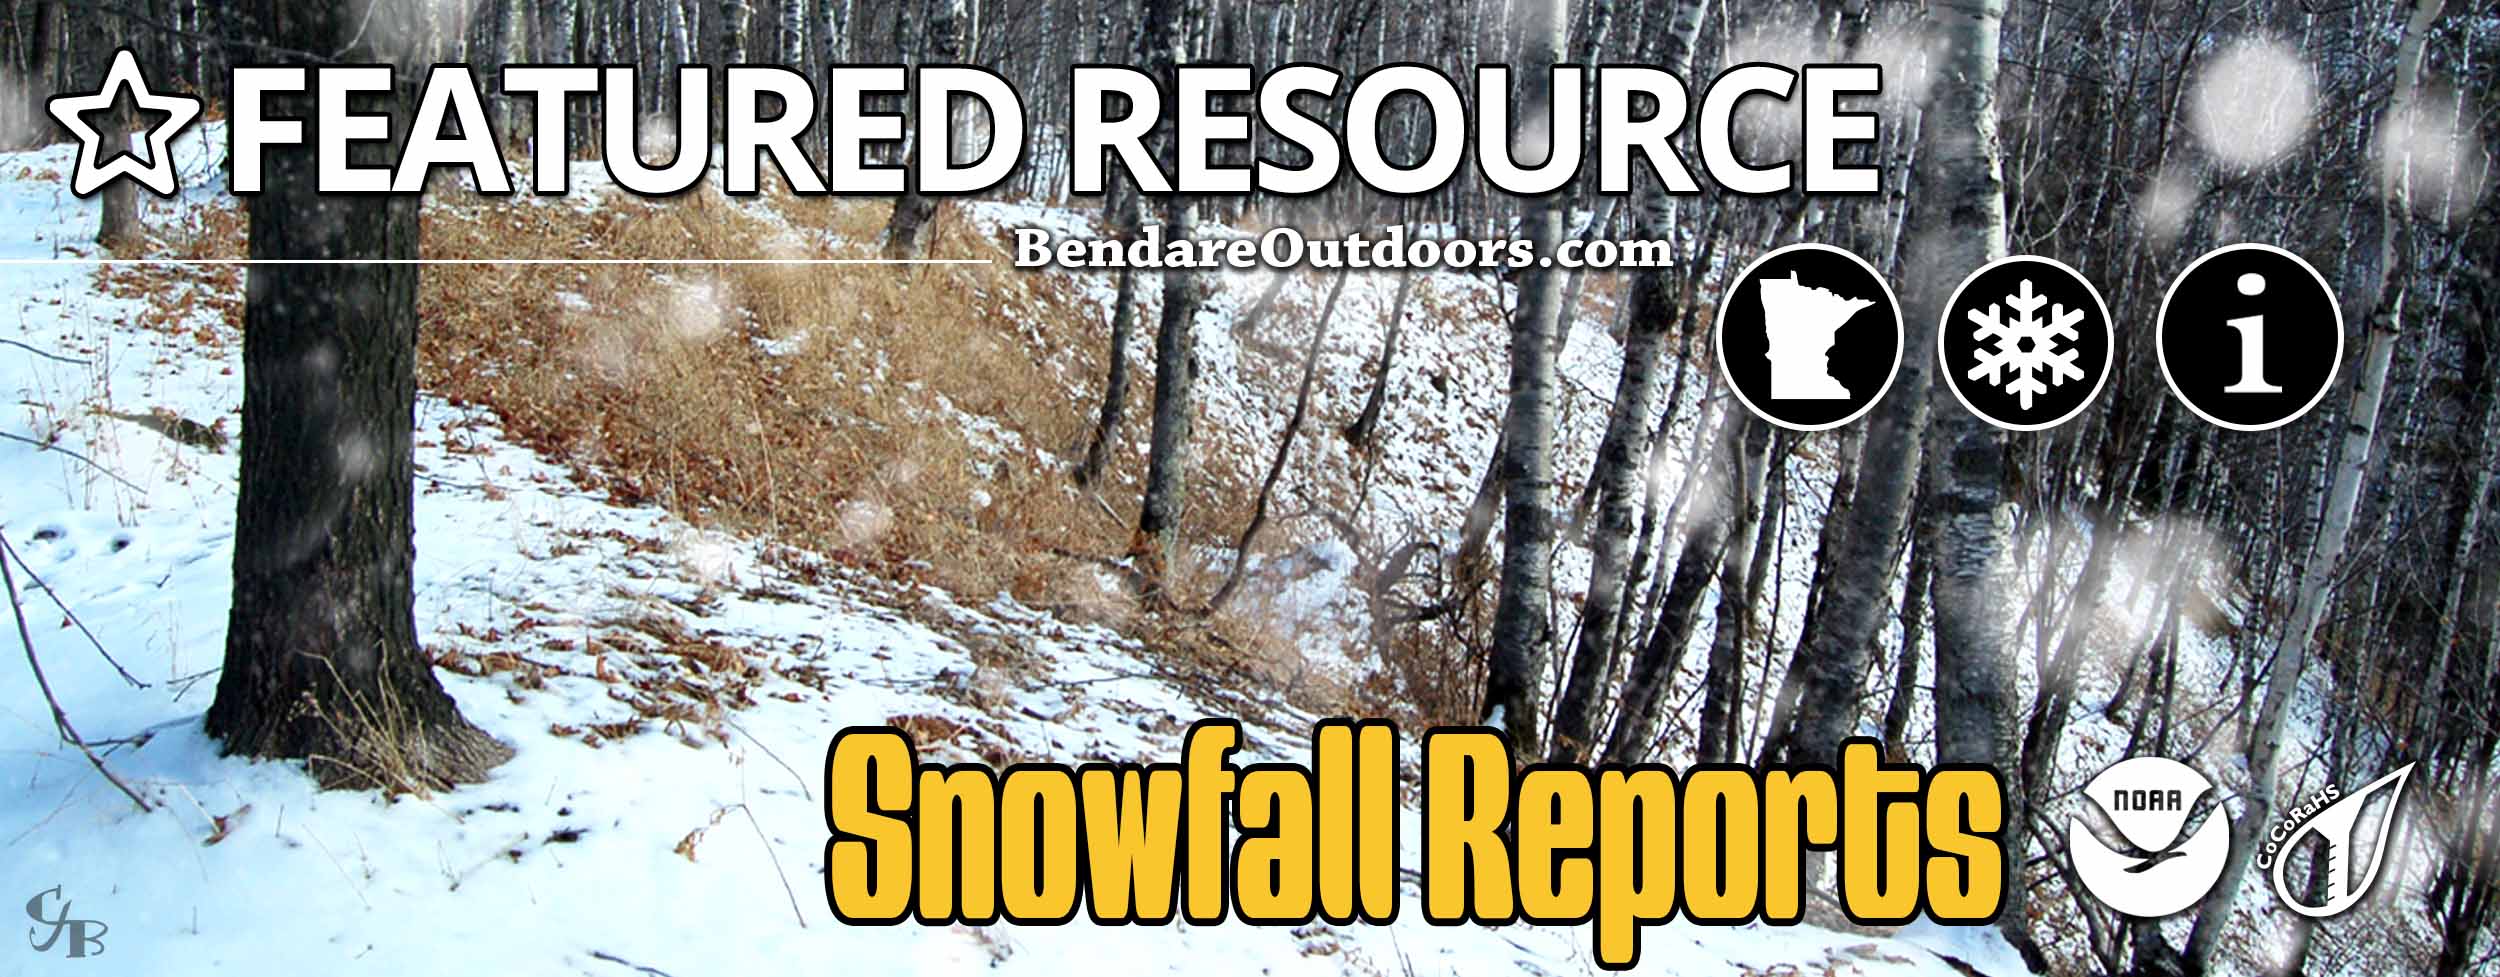 Minnesota Snowfall Reports by Bendare Outdoors